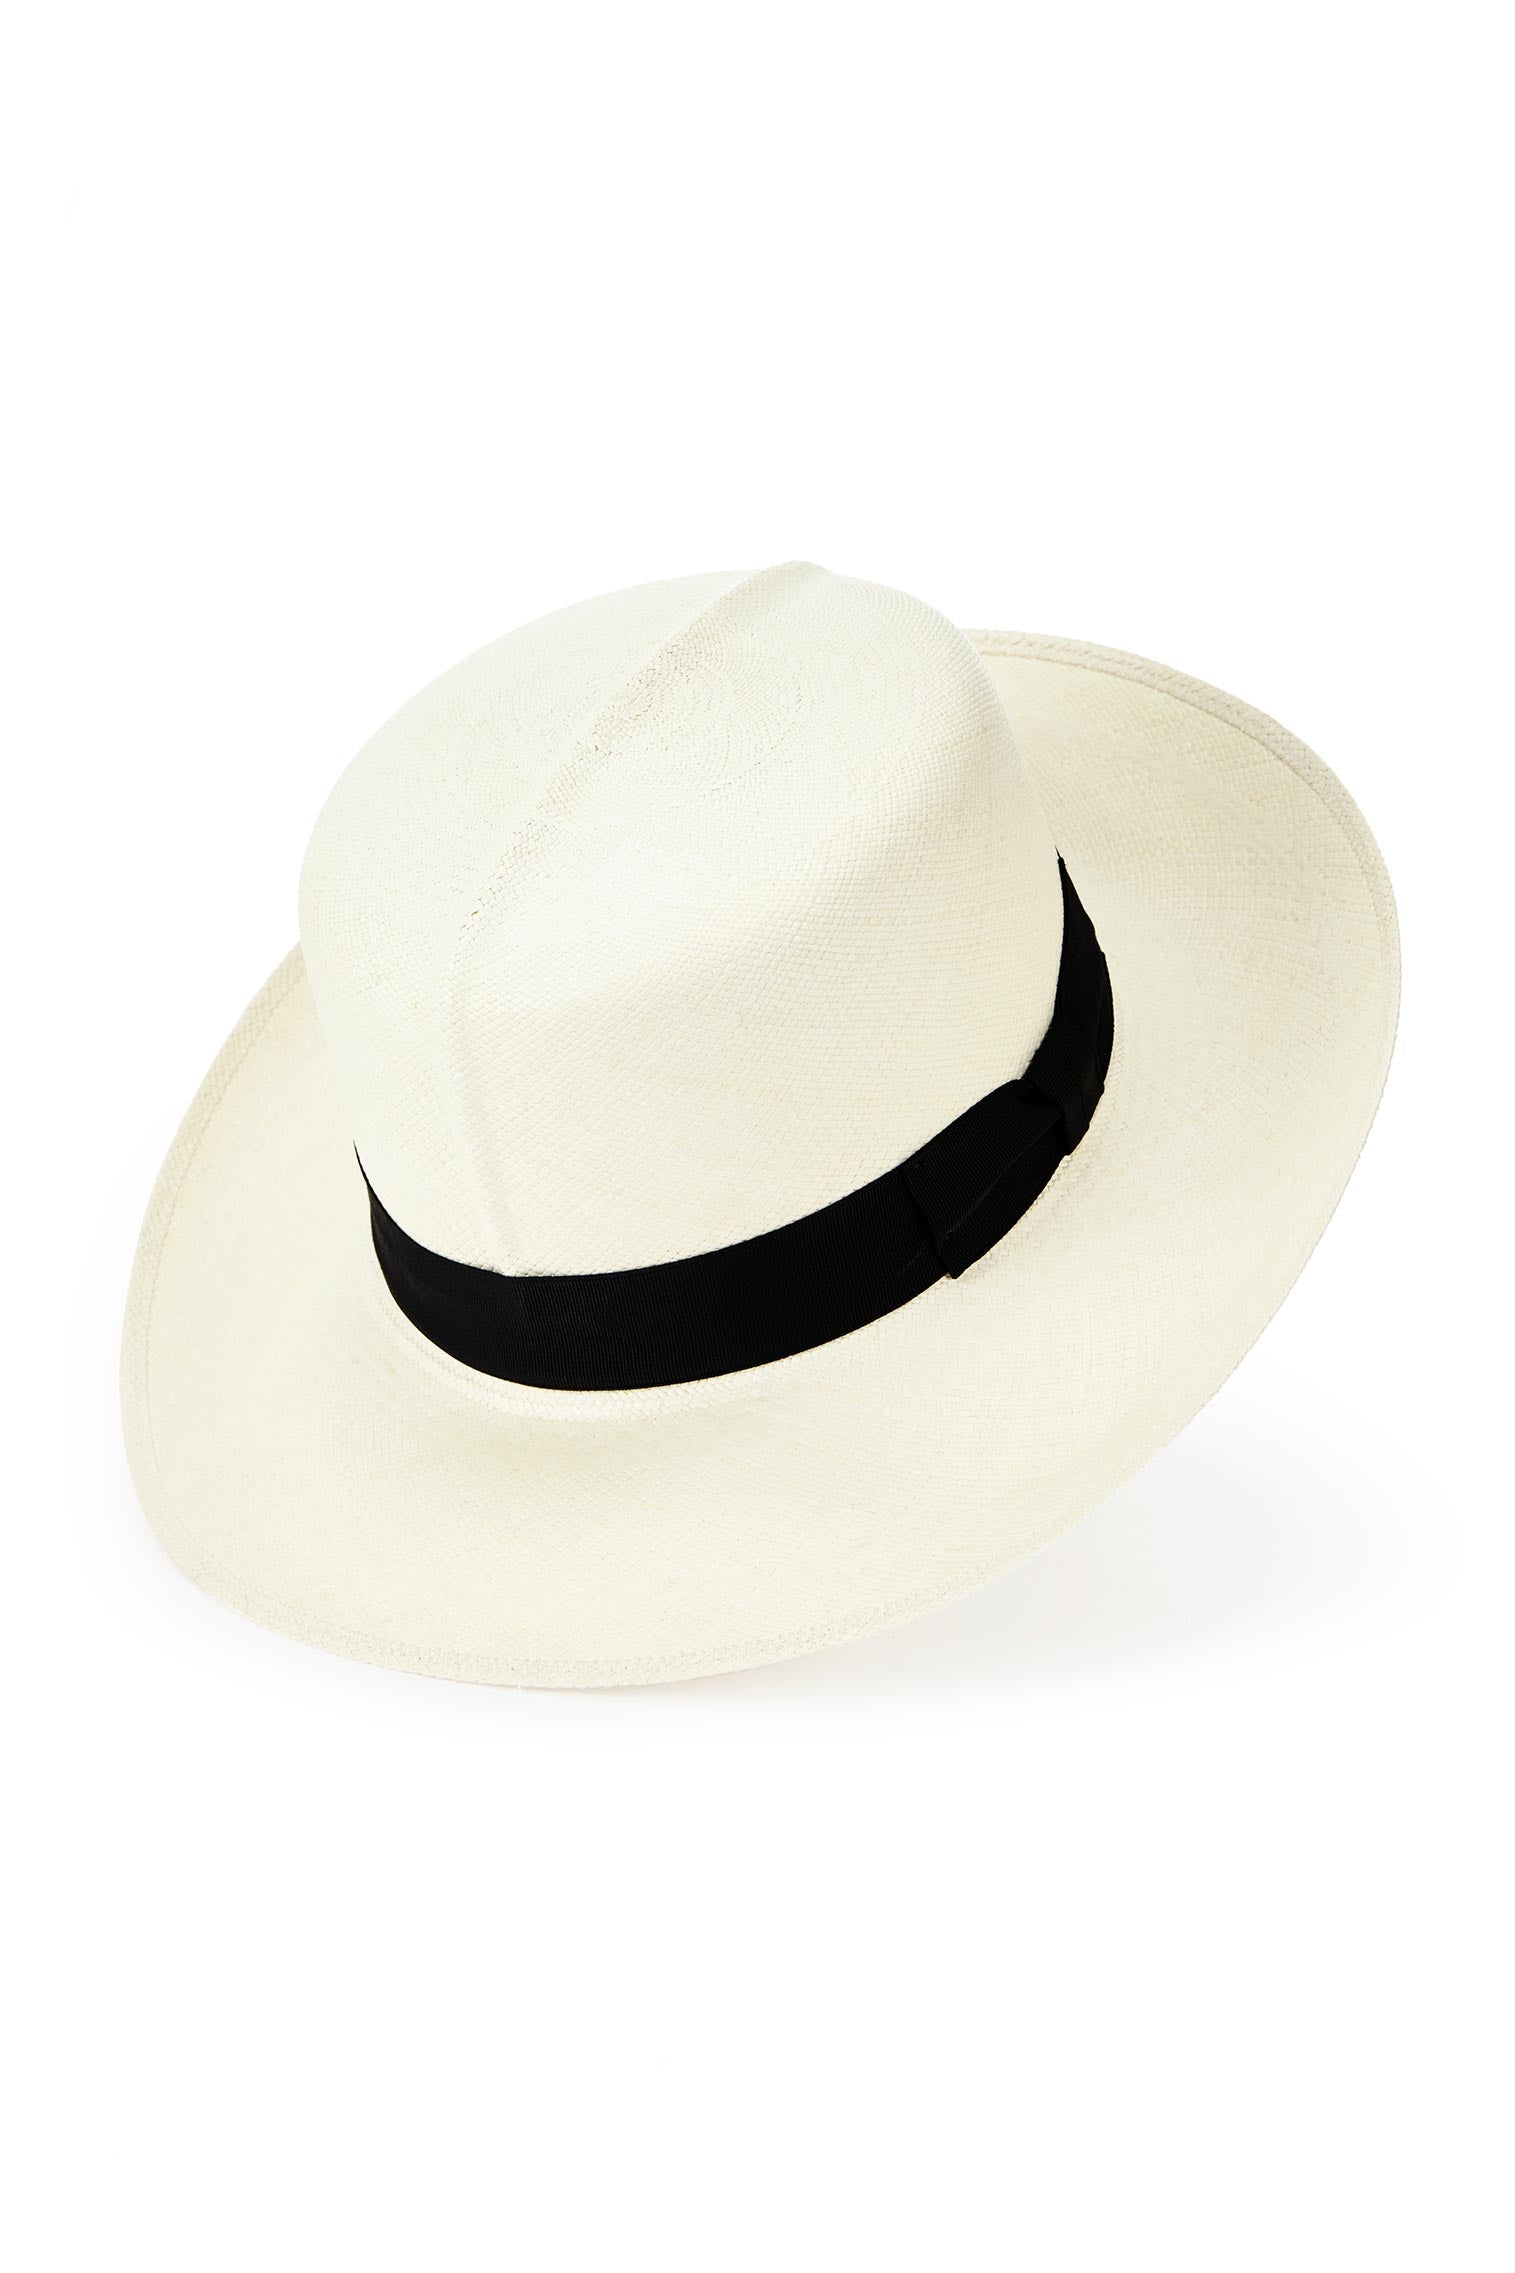 Men's Rollable Panama - Father's Day Gift Guide - Lock & Co. Hatters London UK